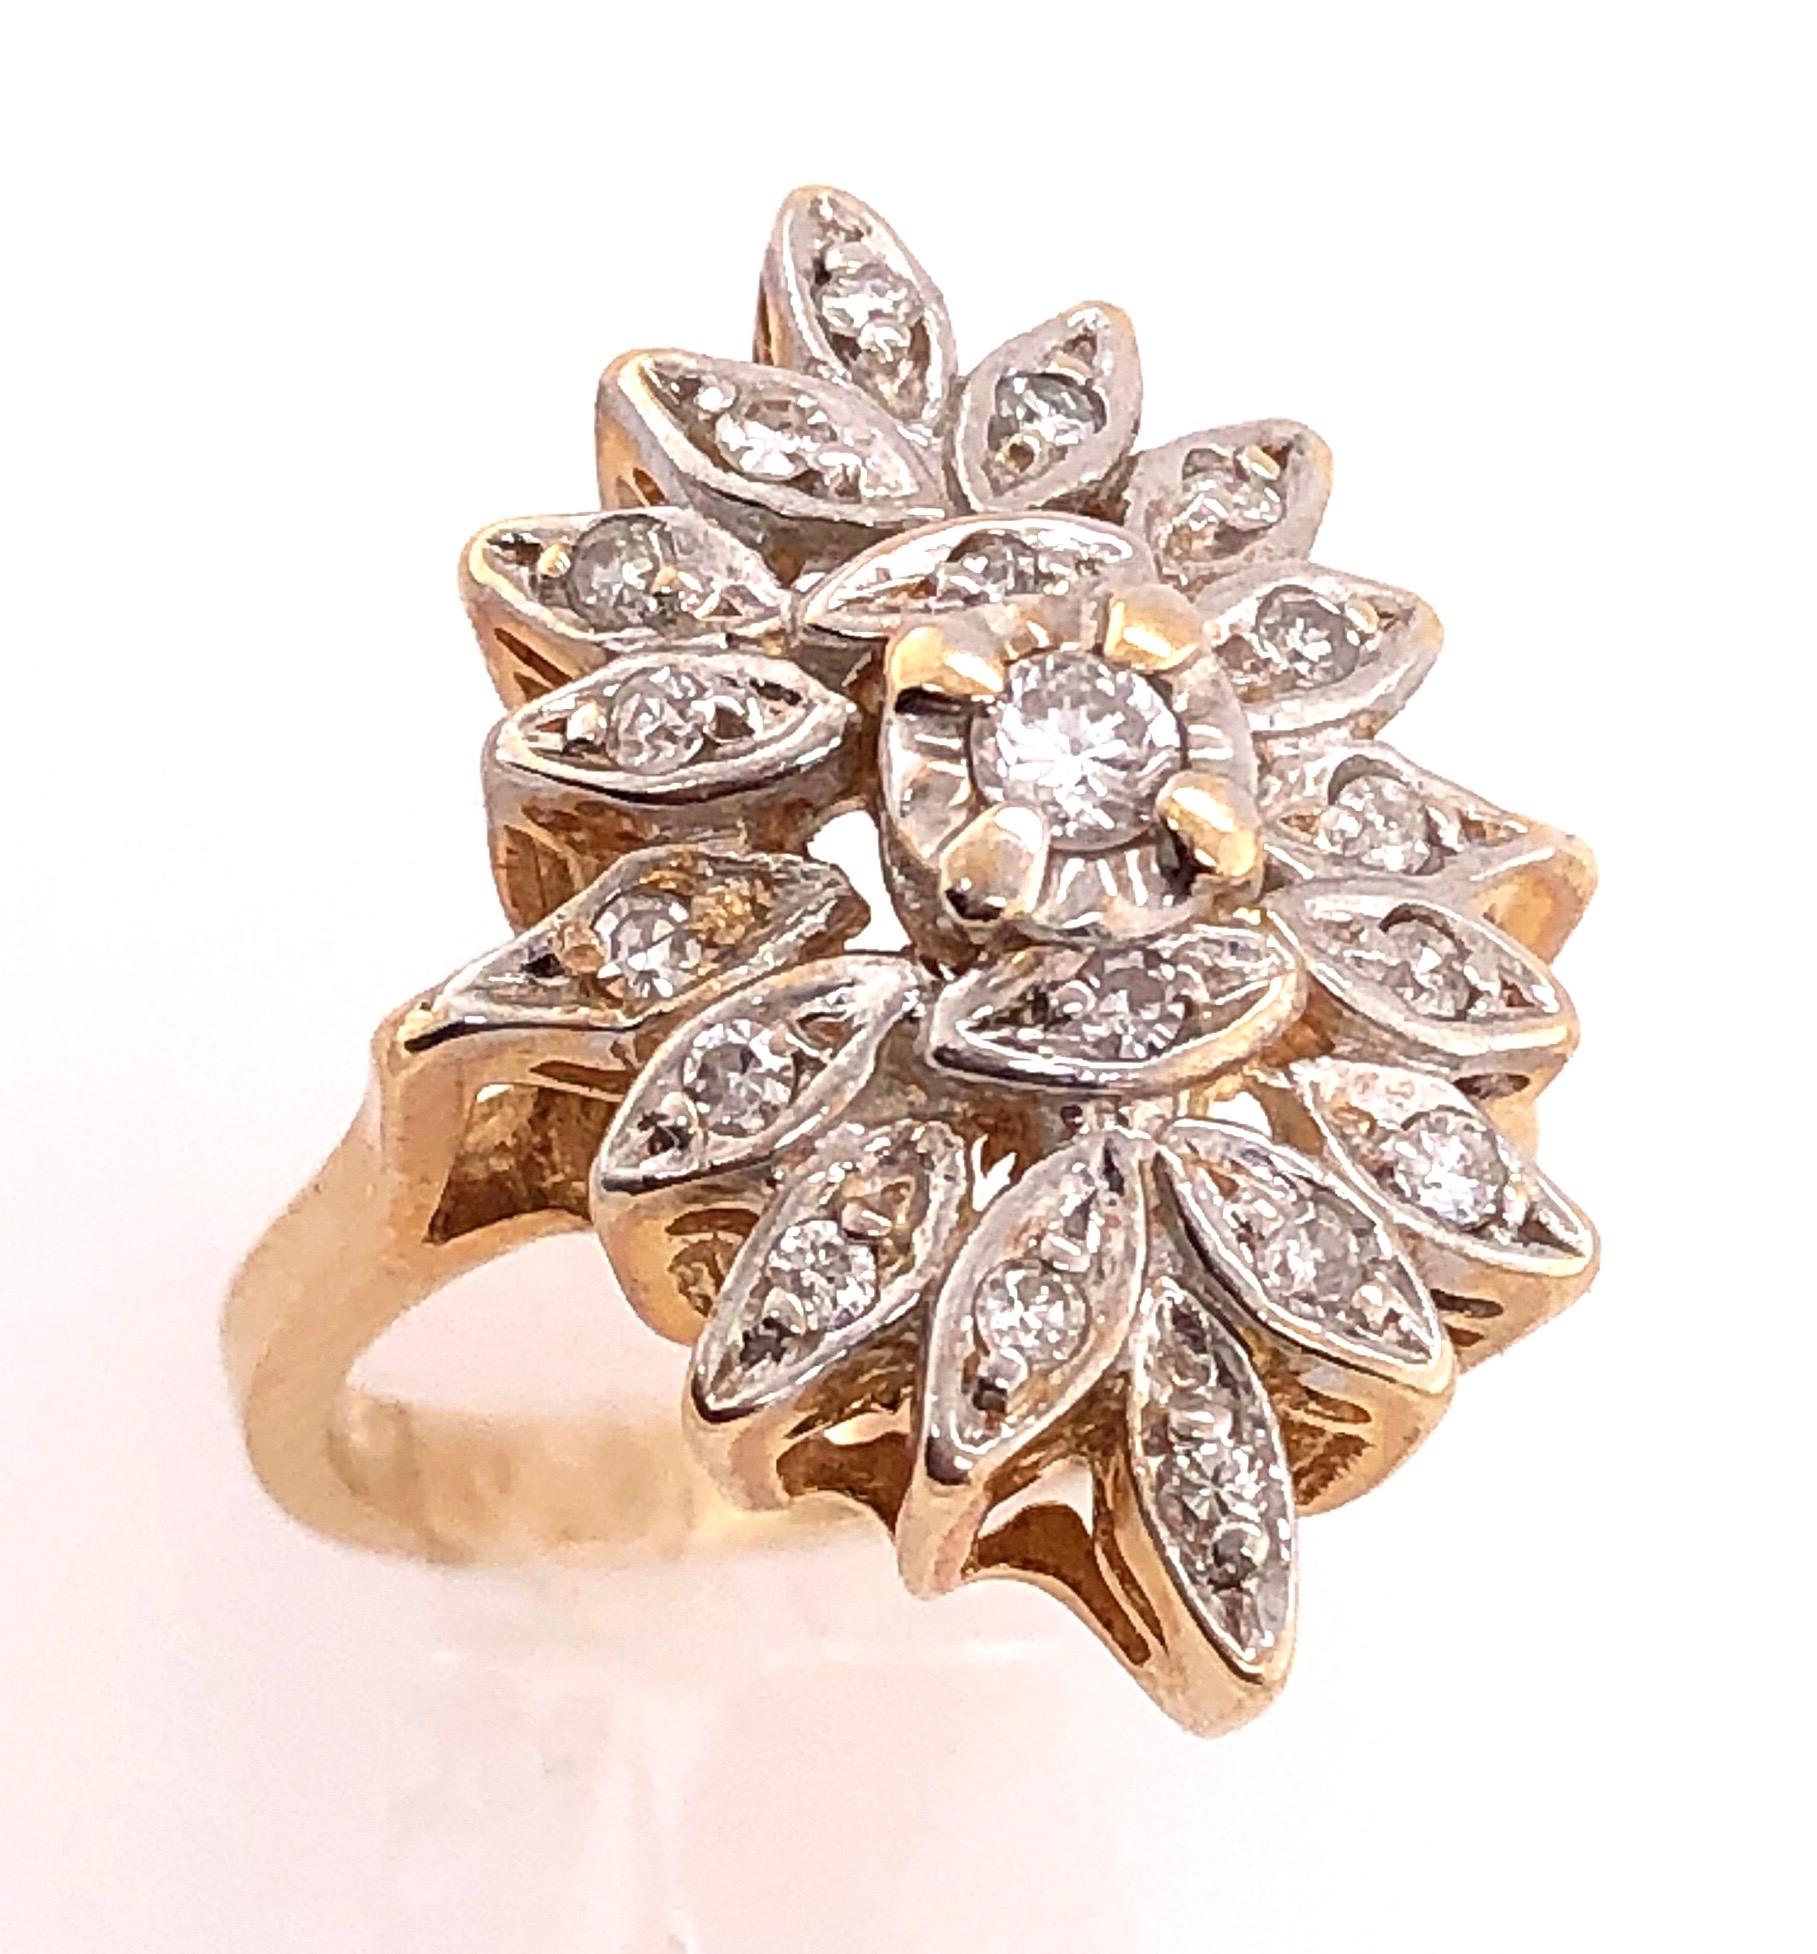 14 Karat Two Tone Gold Fashion Ring with Diamond 0.50 Total Diamond weight
Size 5.75
6.6 grams total weight.
Ring design measurement Height: 25mm
         Width: 15mm   